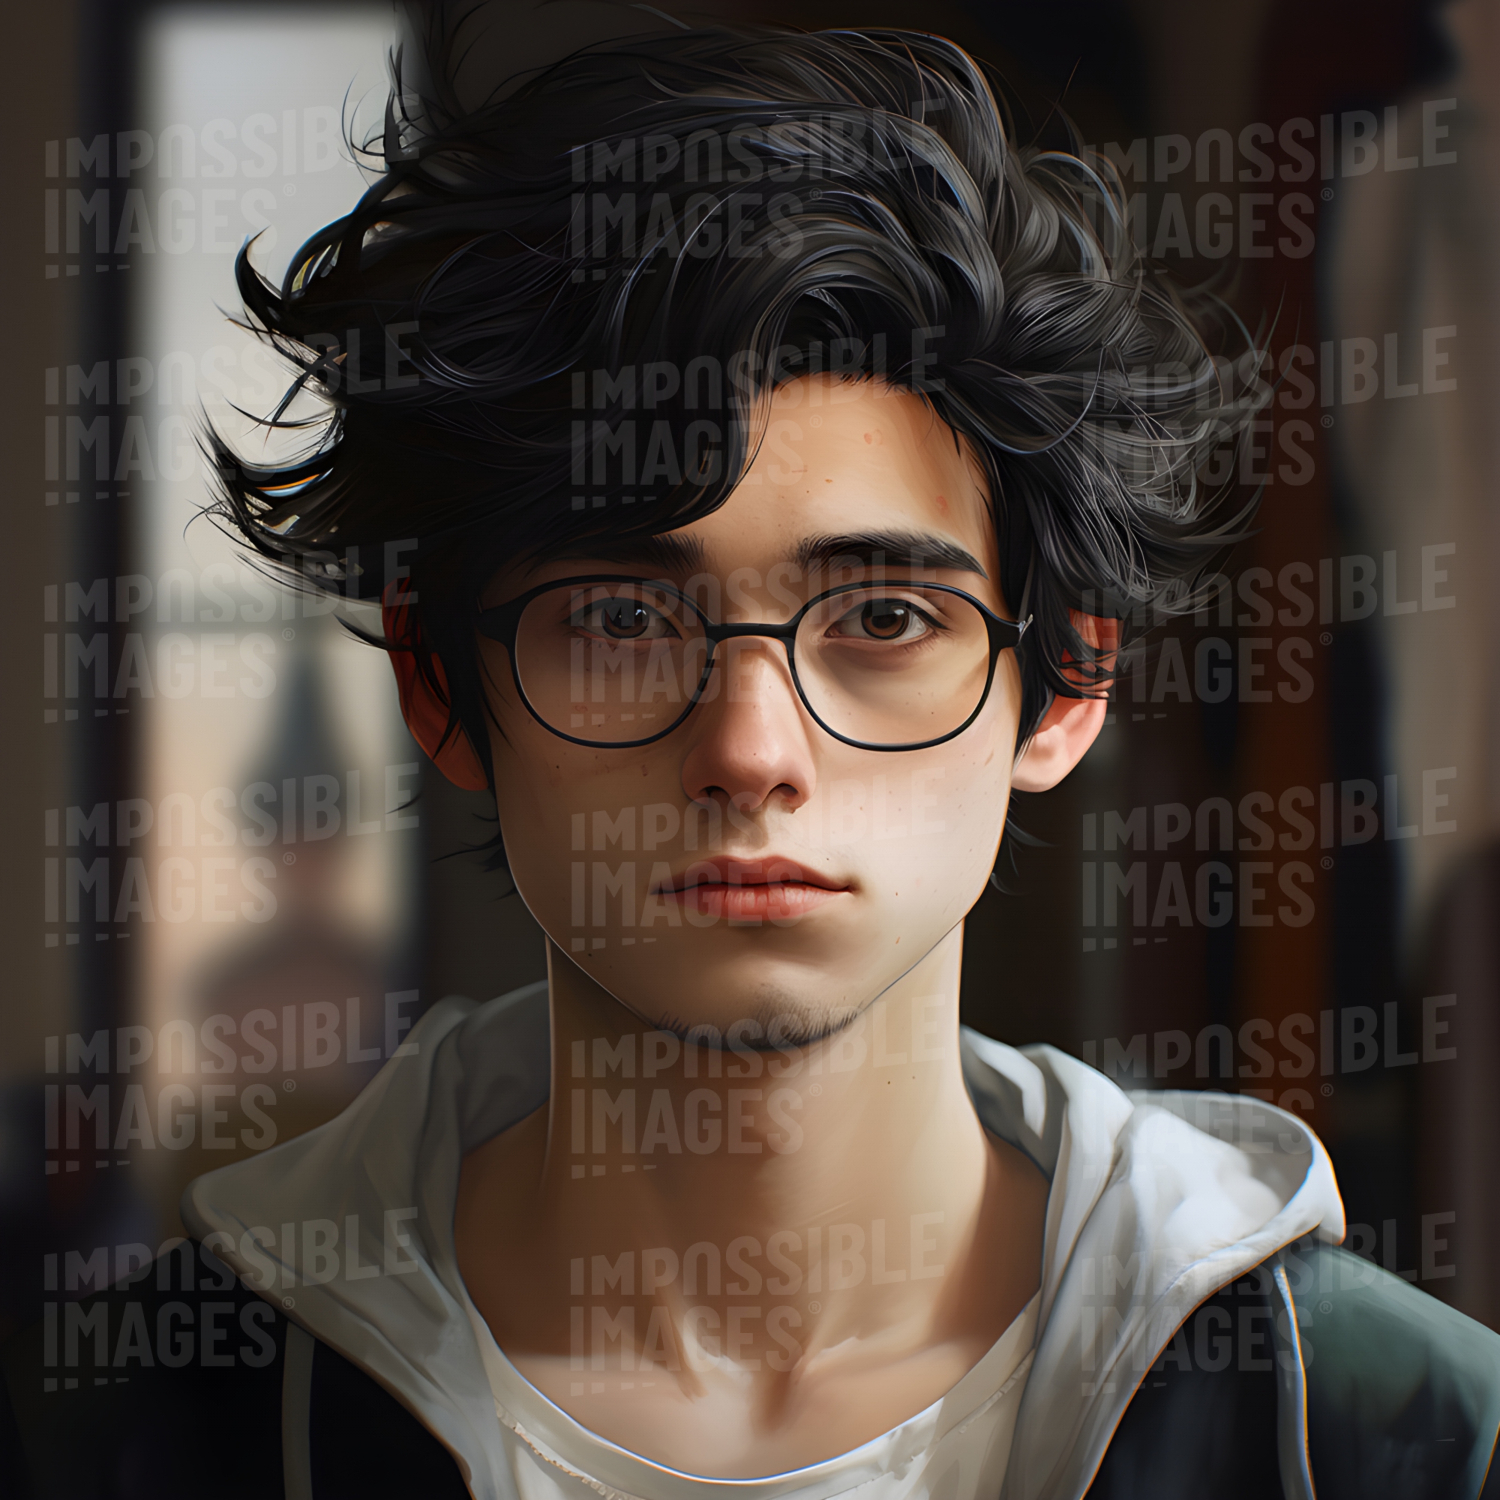 Striking painted portrait of a young man with dark messy hair wearing glasses